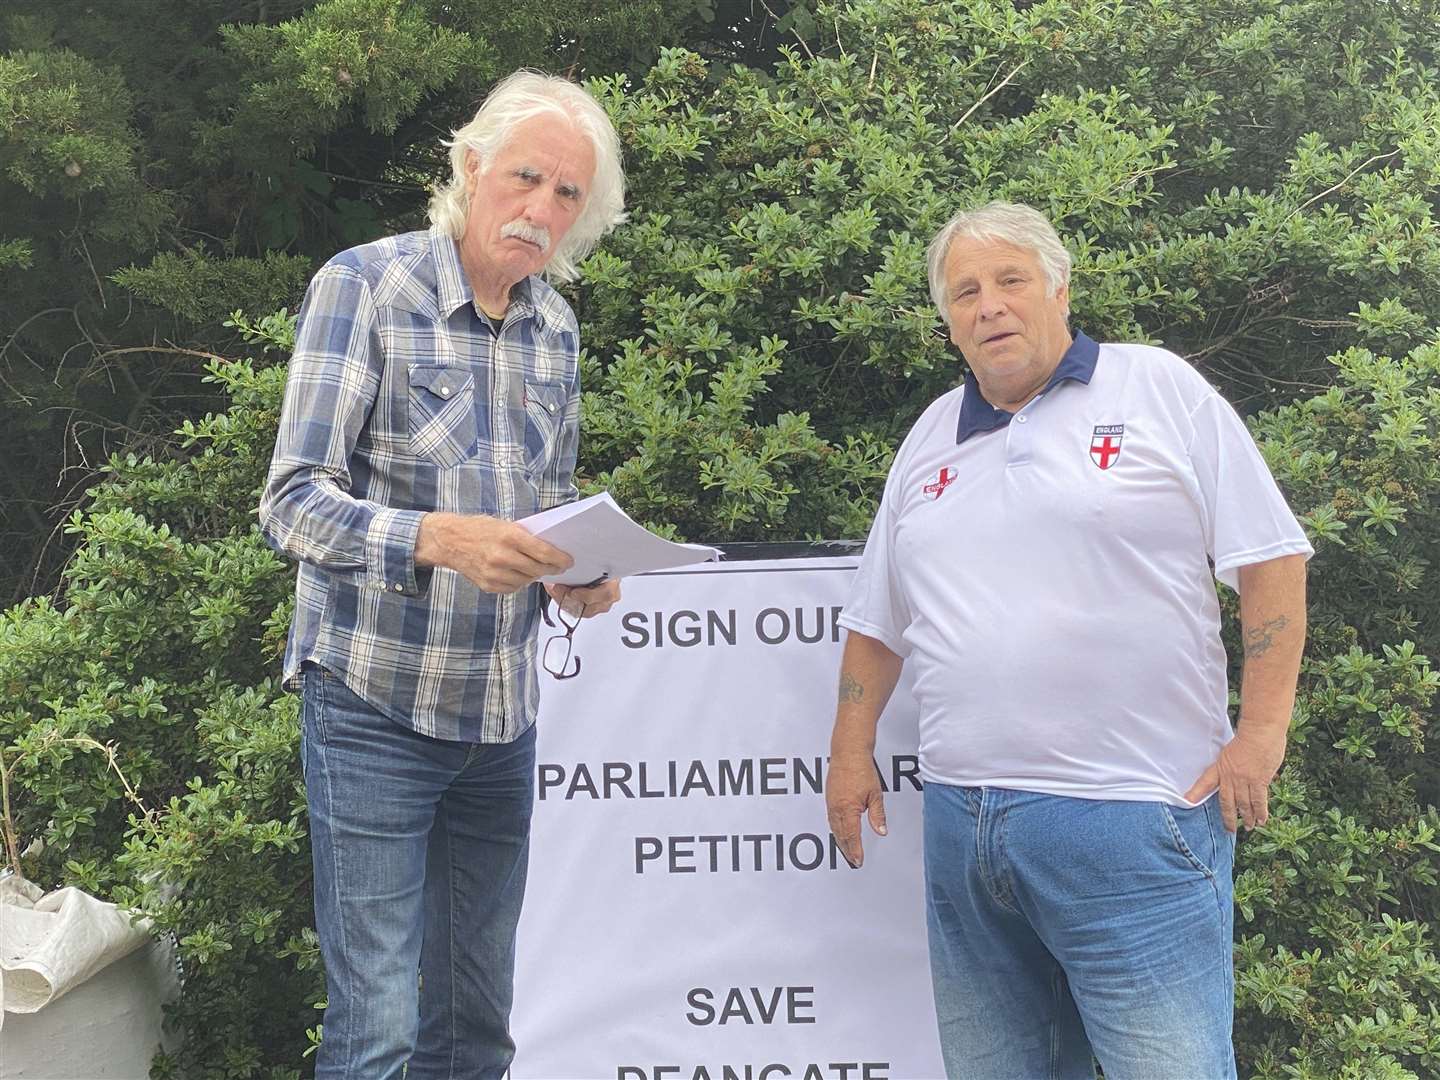 George Crozer, chairman of Deangate Community Partnership and High Halstow Parish Council and Medway councillor Ron Sands (Ind) have long opposed development at Deangate